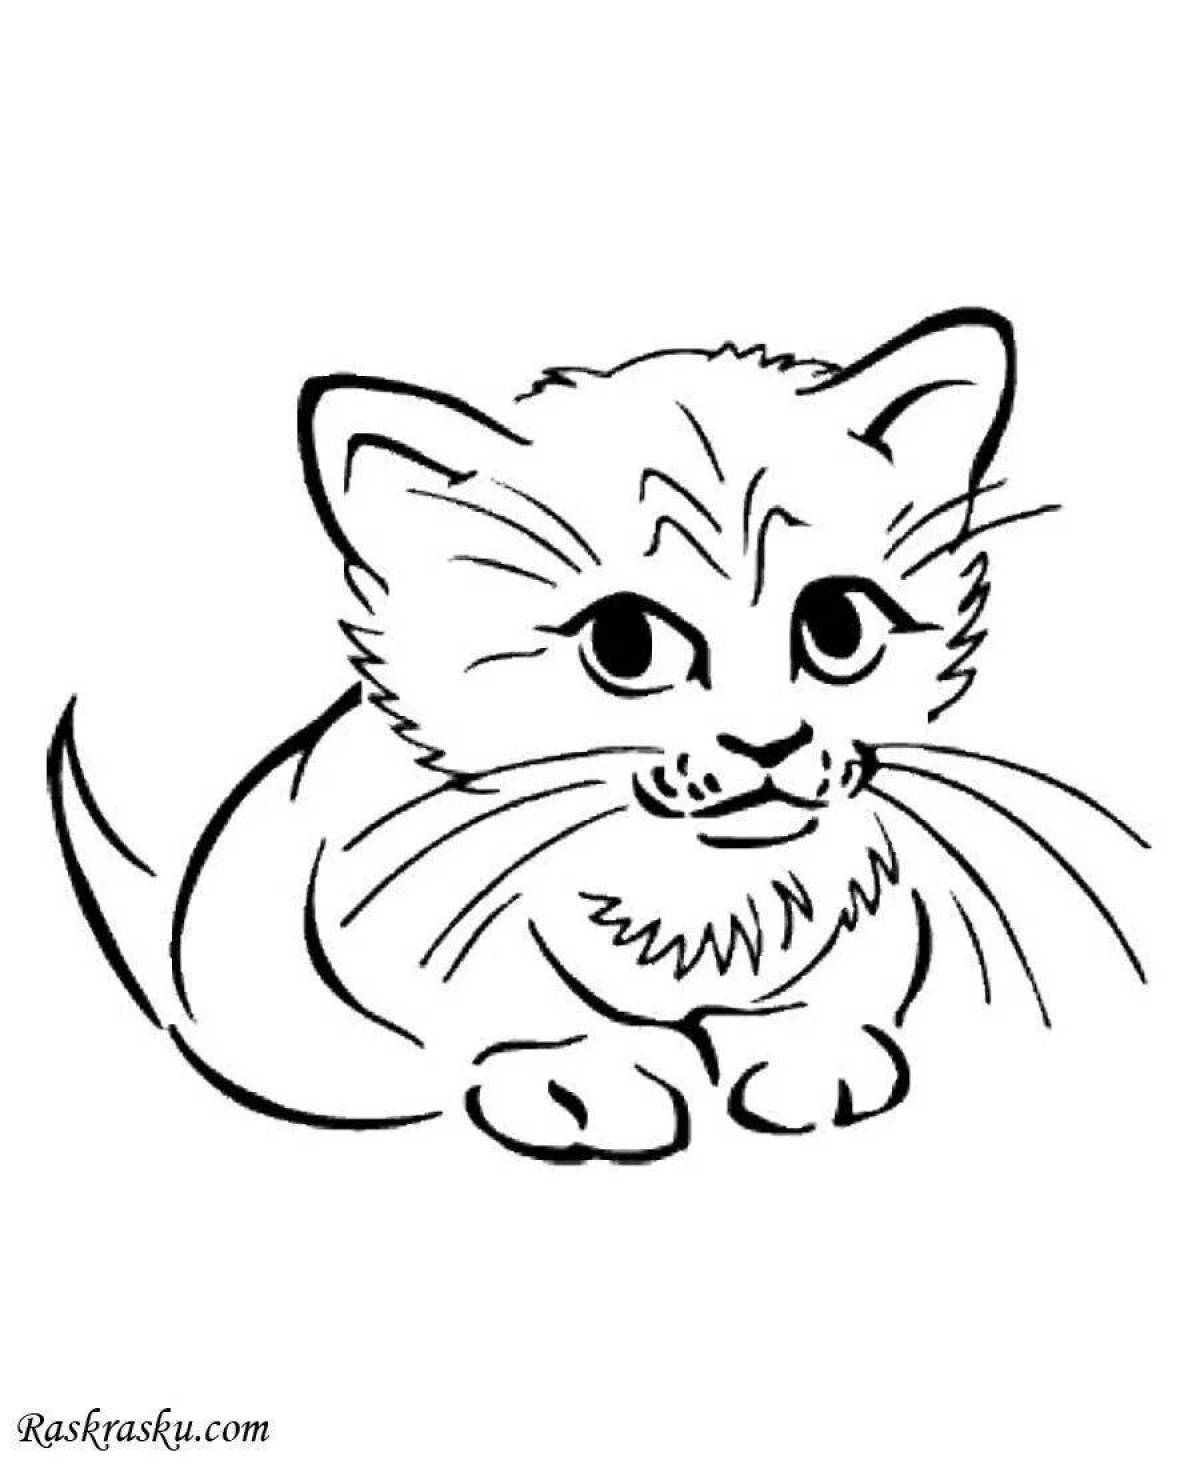 Playful cat coloring page